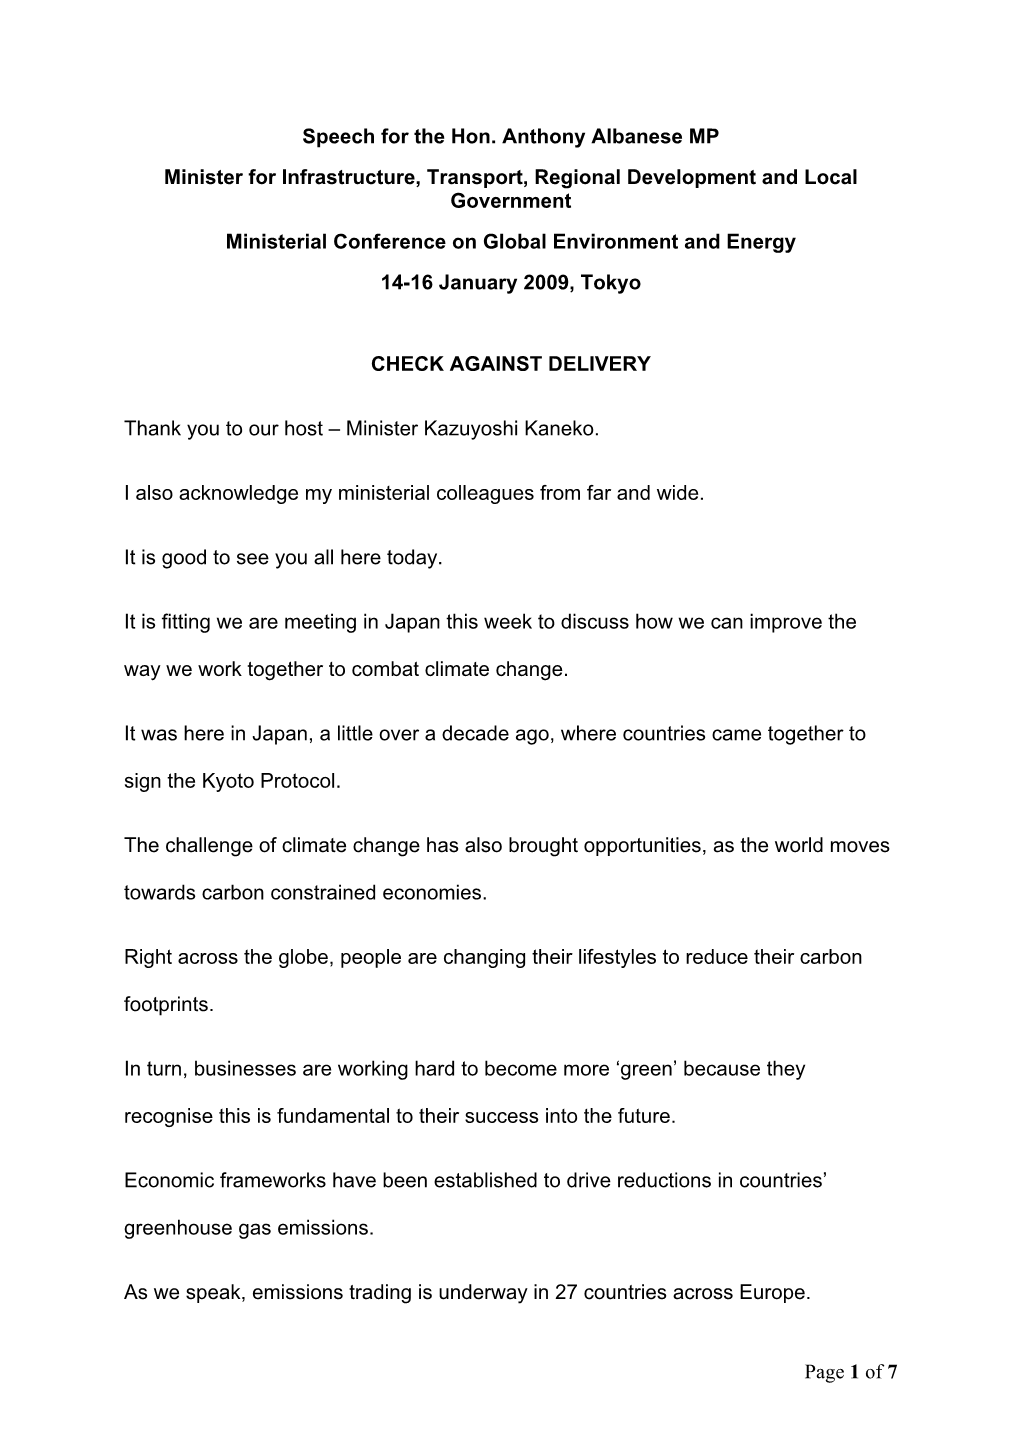 Page 1 of 7 Speech for the Hon. Anthony Albanese MP Minister for Infrastructure, Transport, Regional Development and Local Gover